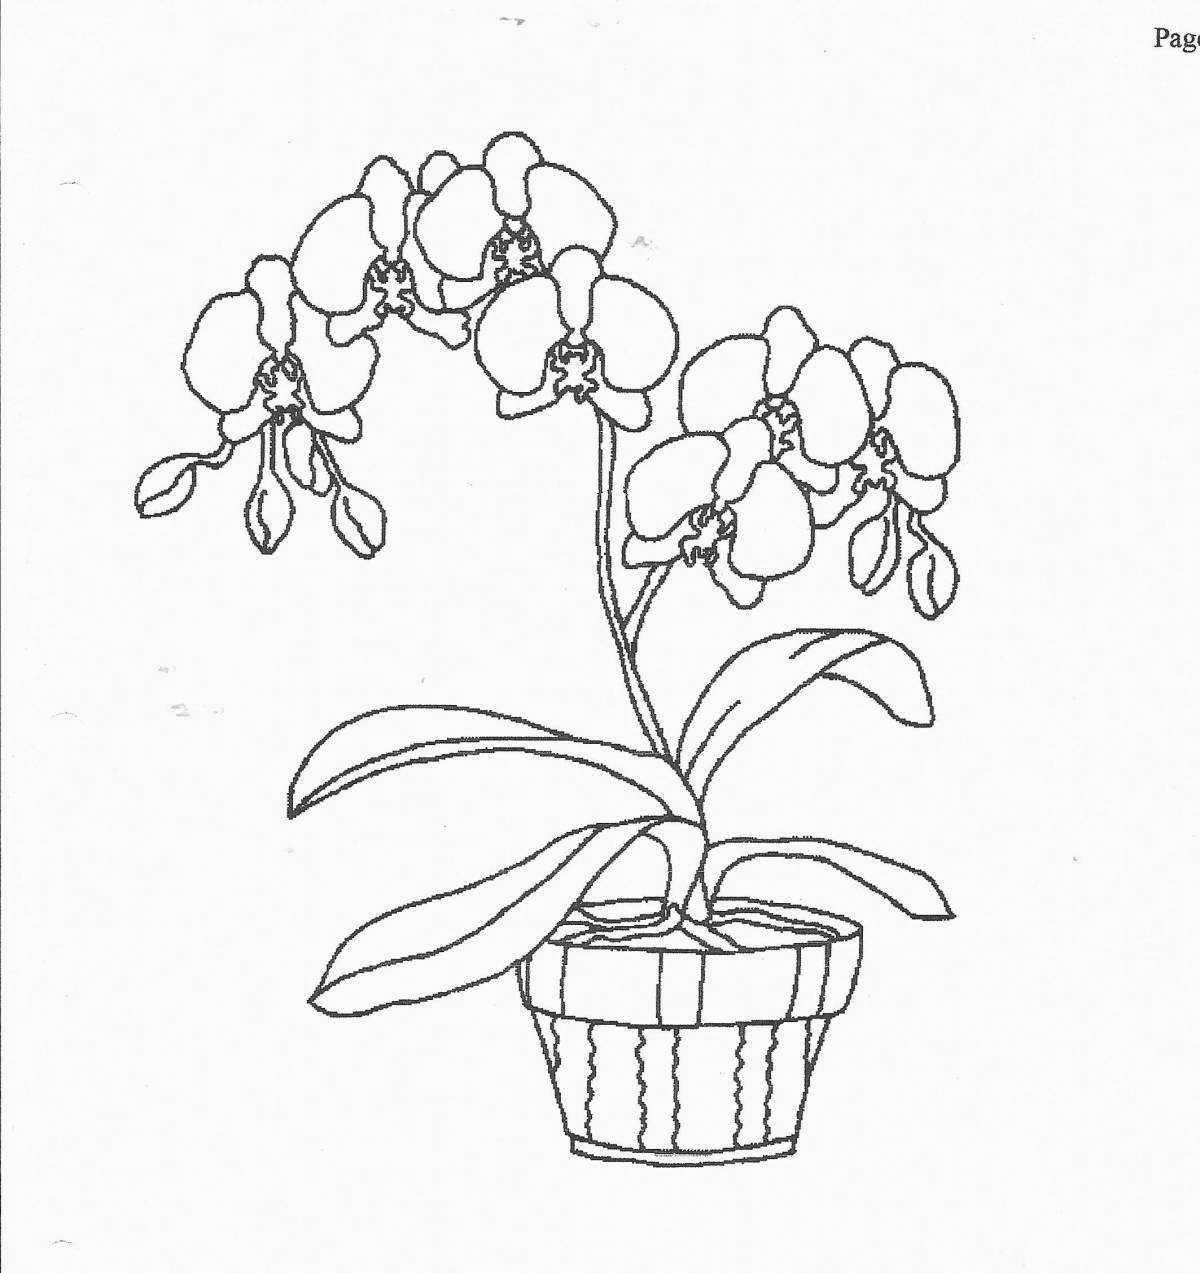 Adorable indoor plants coloring book for 6-7 year olds